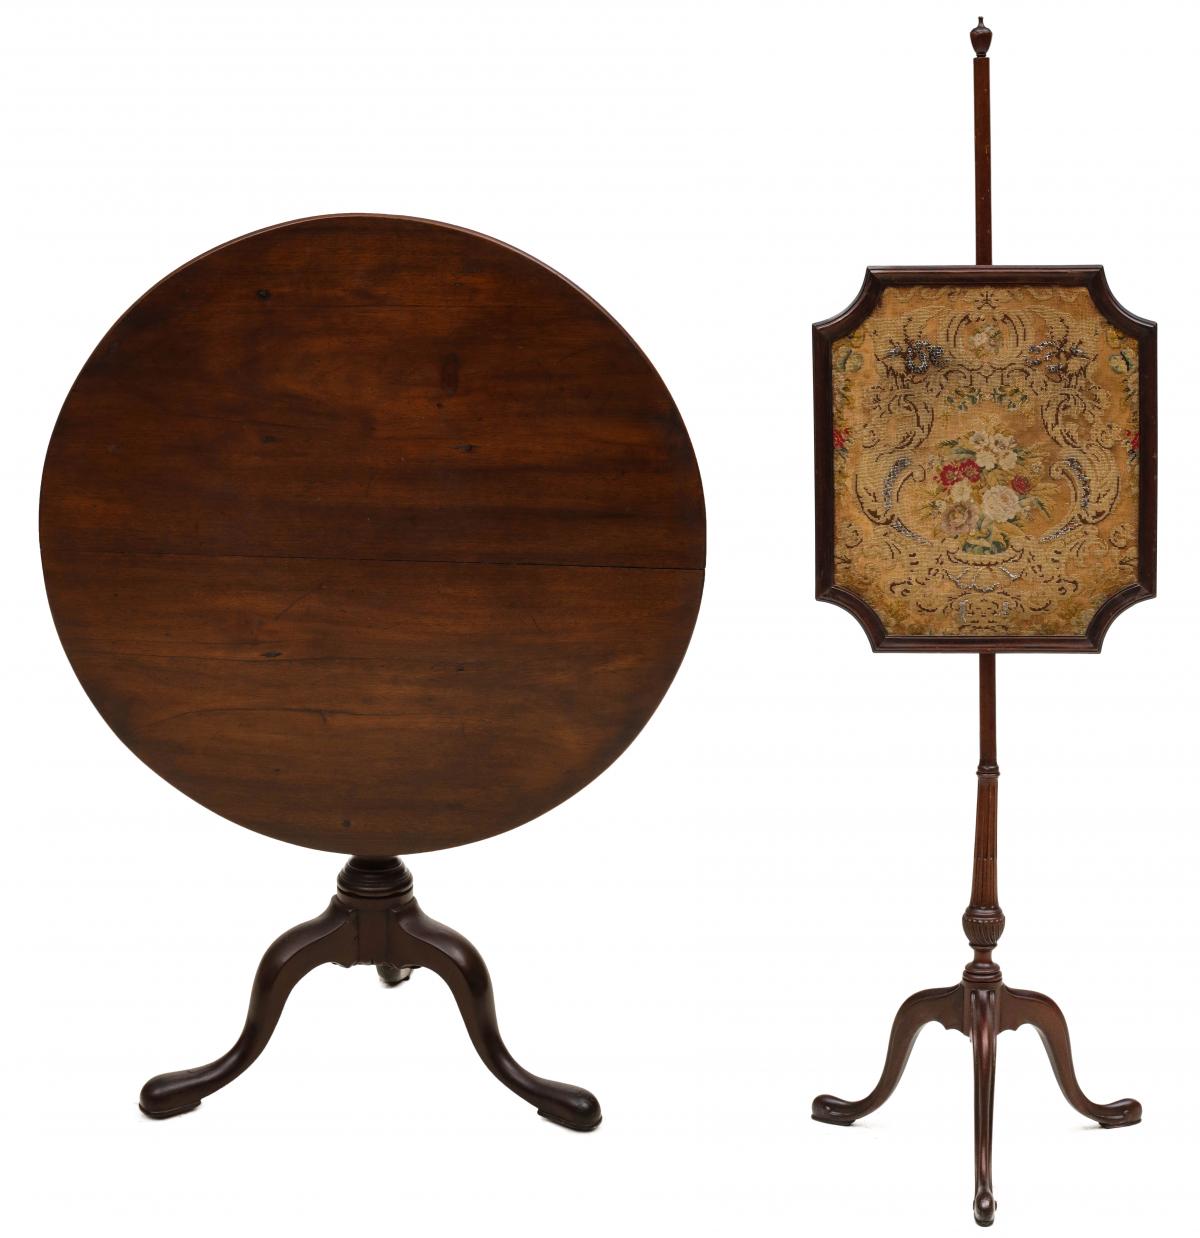 19TH C. TILT TOP TABLE AND POLE FIRE SCREEN